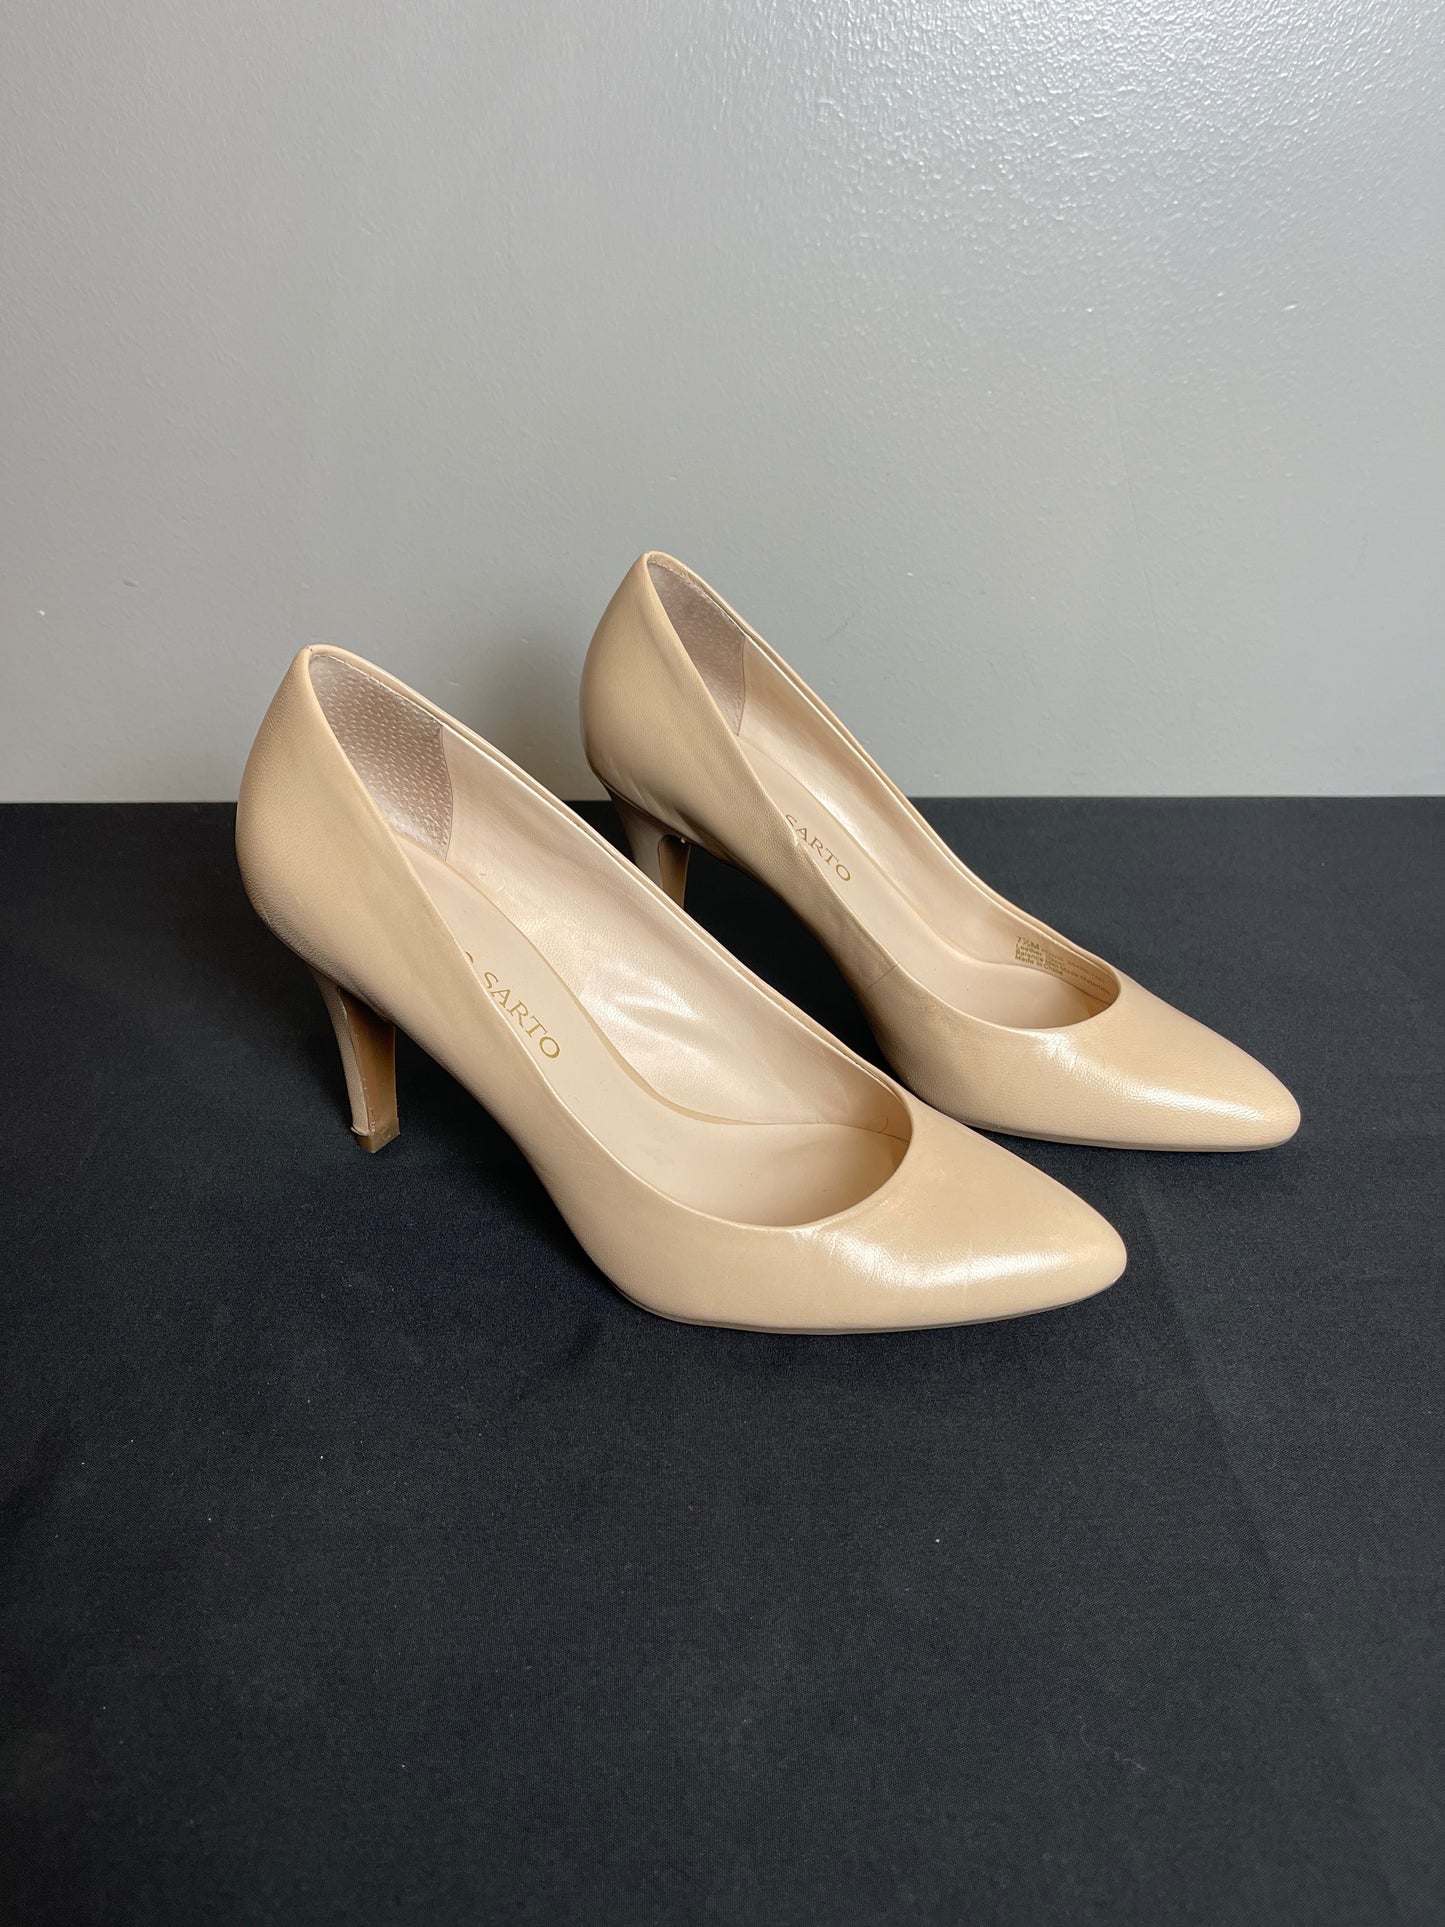 Shoes Heels Stiletto By Franco Sarto  Size: 7.5